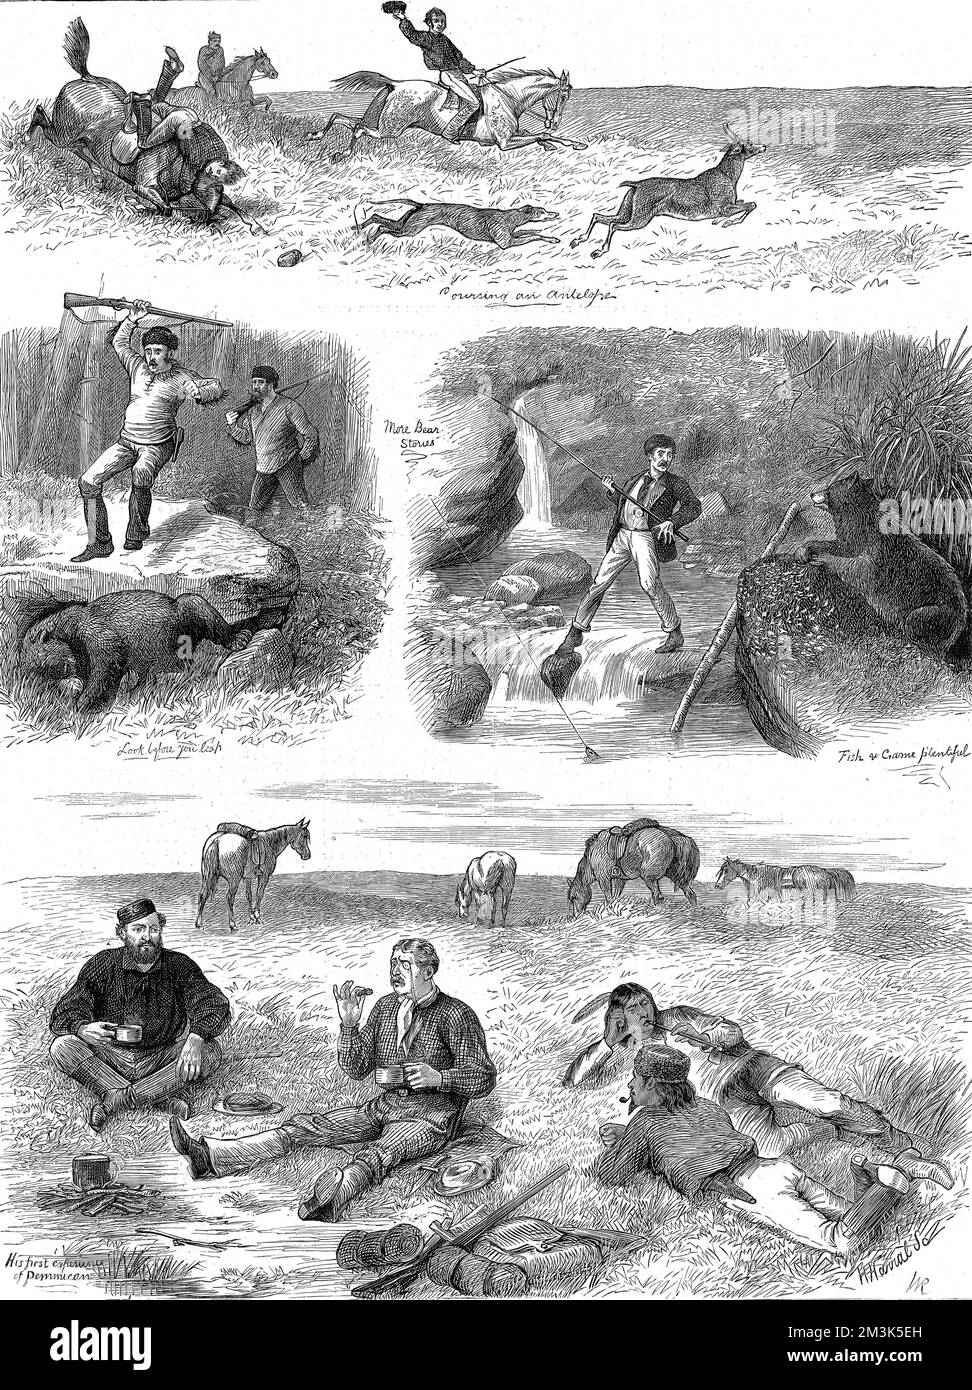 Four views of European men hunting and fishing in Manitoba, Canada.  The views show (clockwise from top): Coursing an antelope with a dog; a Brown Bear disturbing a fishing session; a European visitor (centre) not enjoying his first experience of 'pemmican' around the camp-fire; and a hunter rather carlessly leaping onto a large brown bear.  1877 Stock Photo